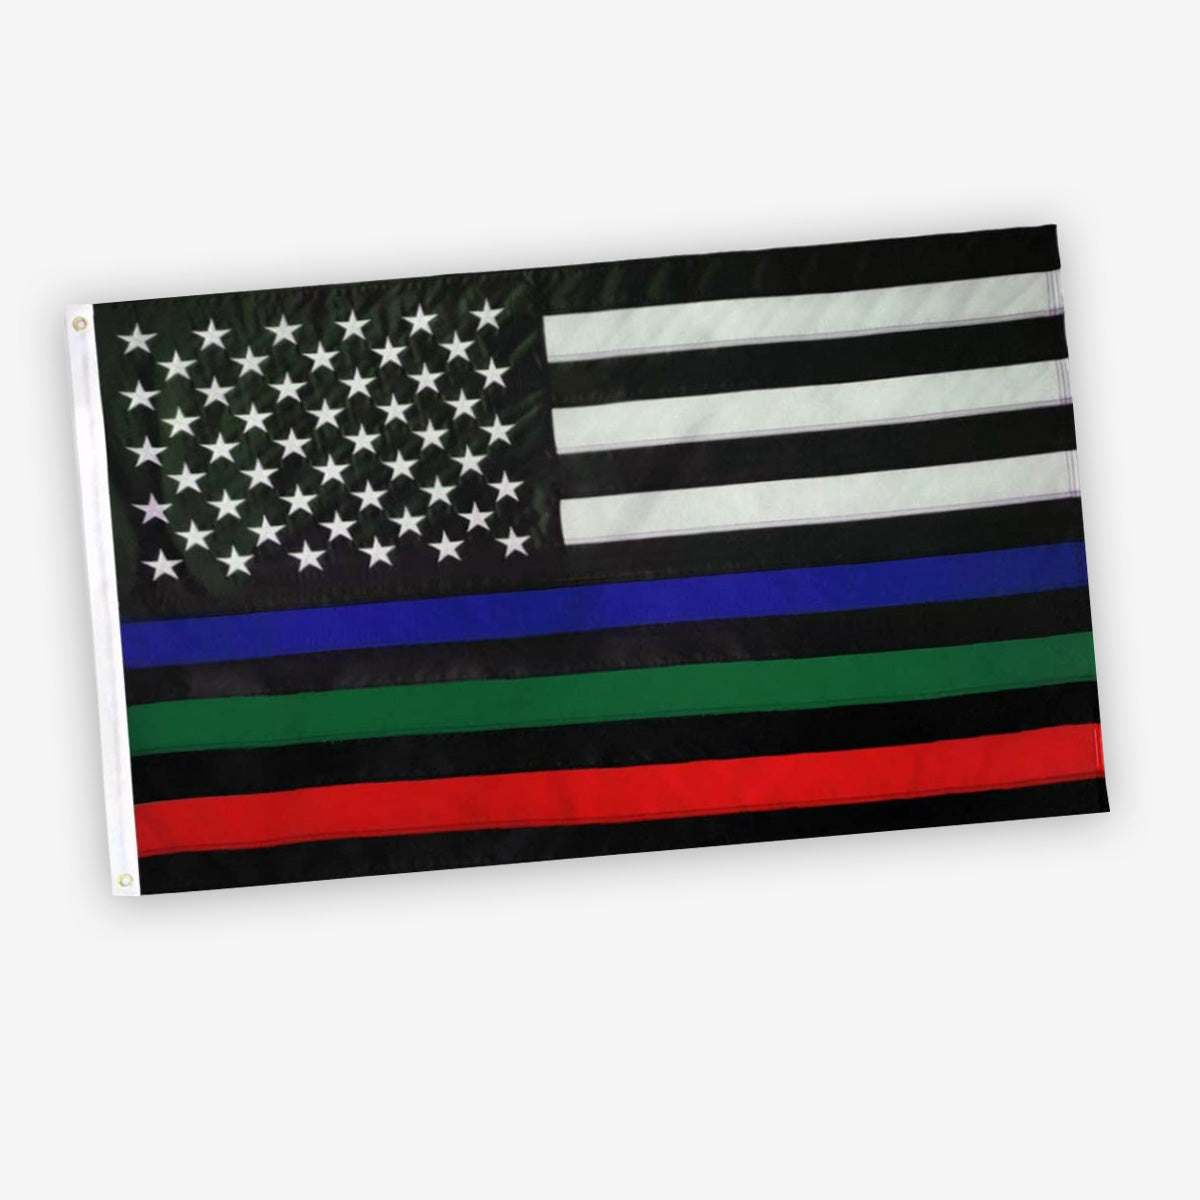 Blue Green Red Flag - Support Your Police, Fire Fighters, Military